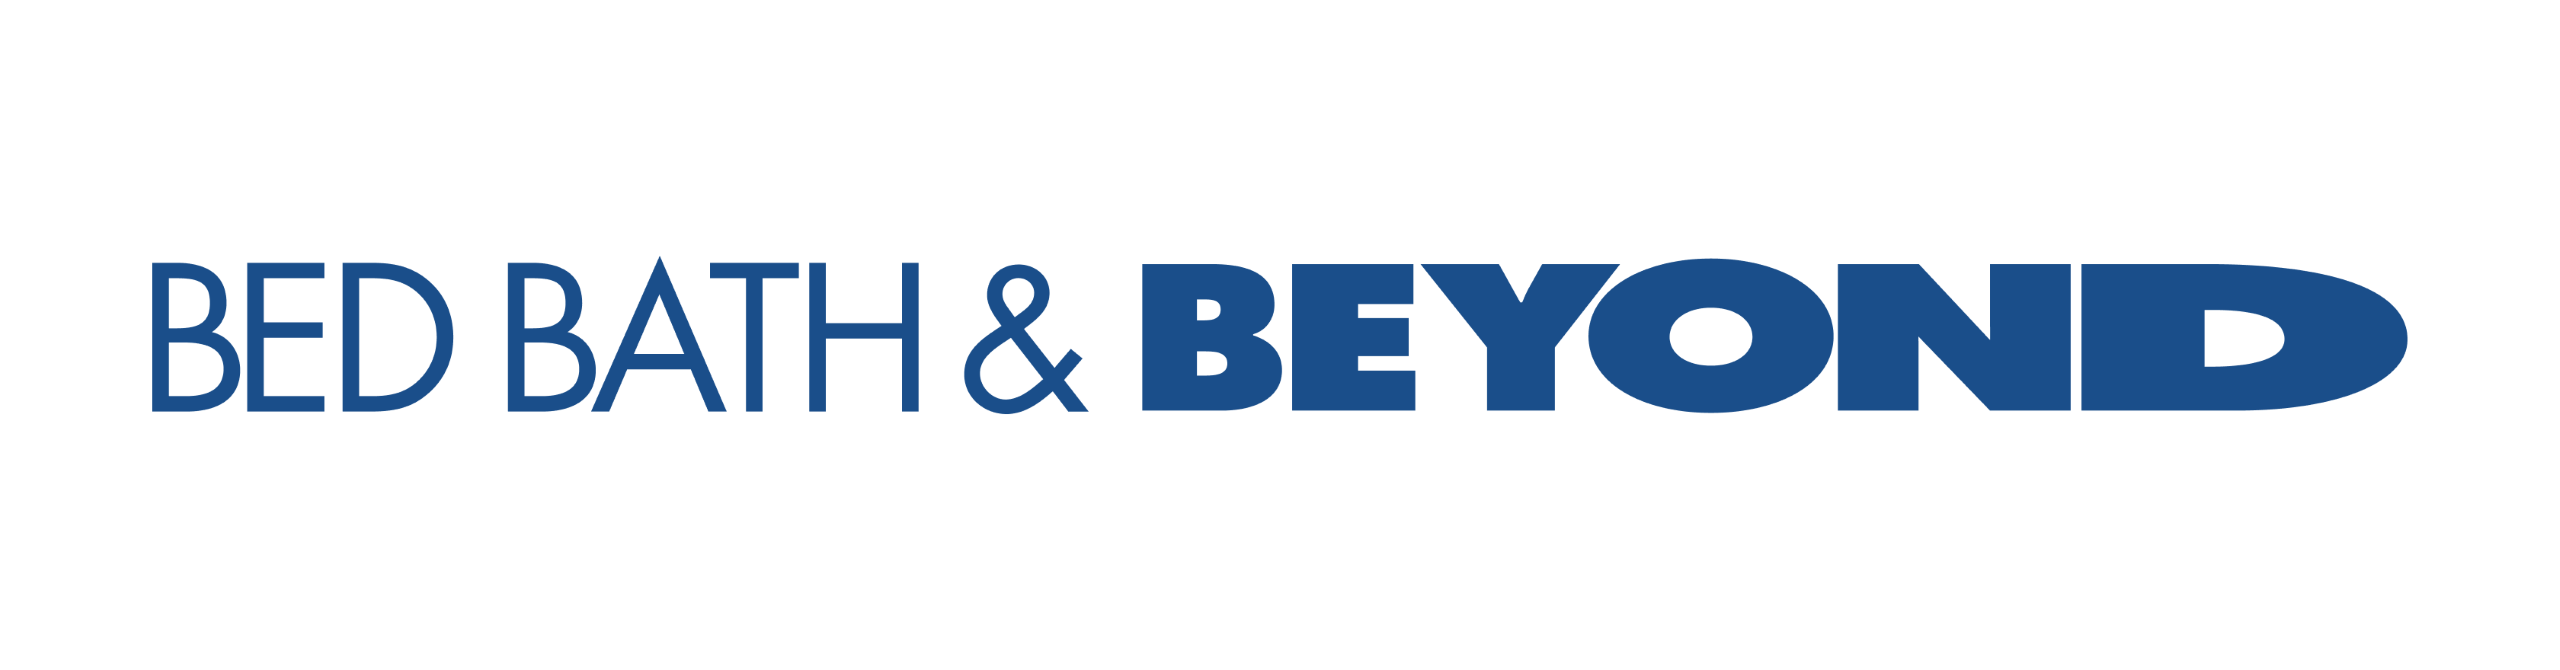 Bed Bath & Beyond is back, but 'much bigger, better,' Overstock